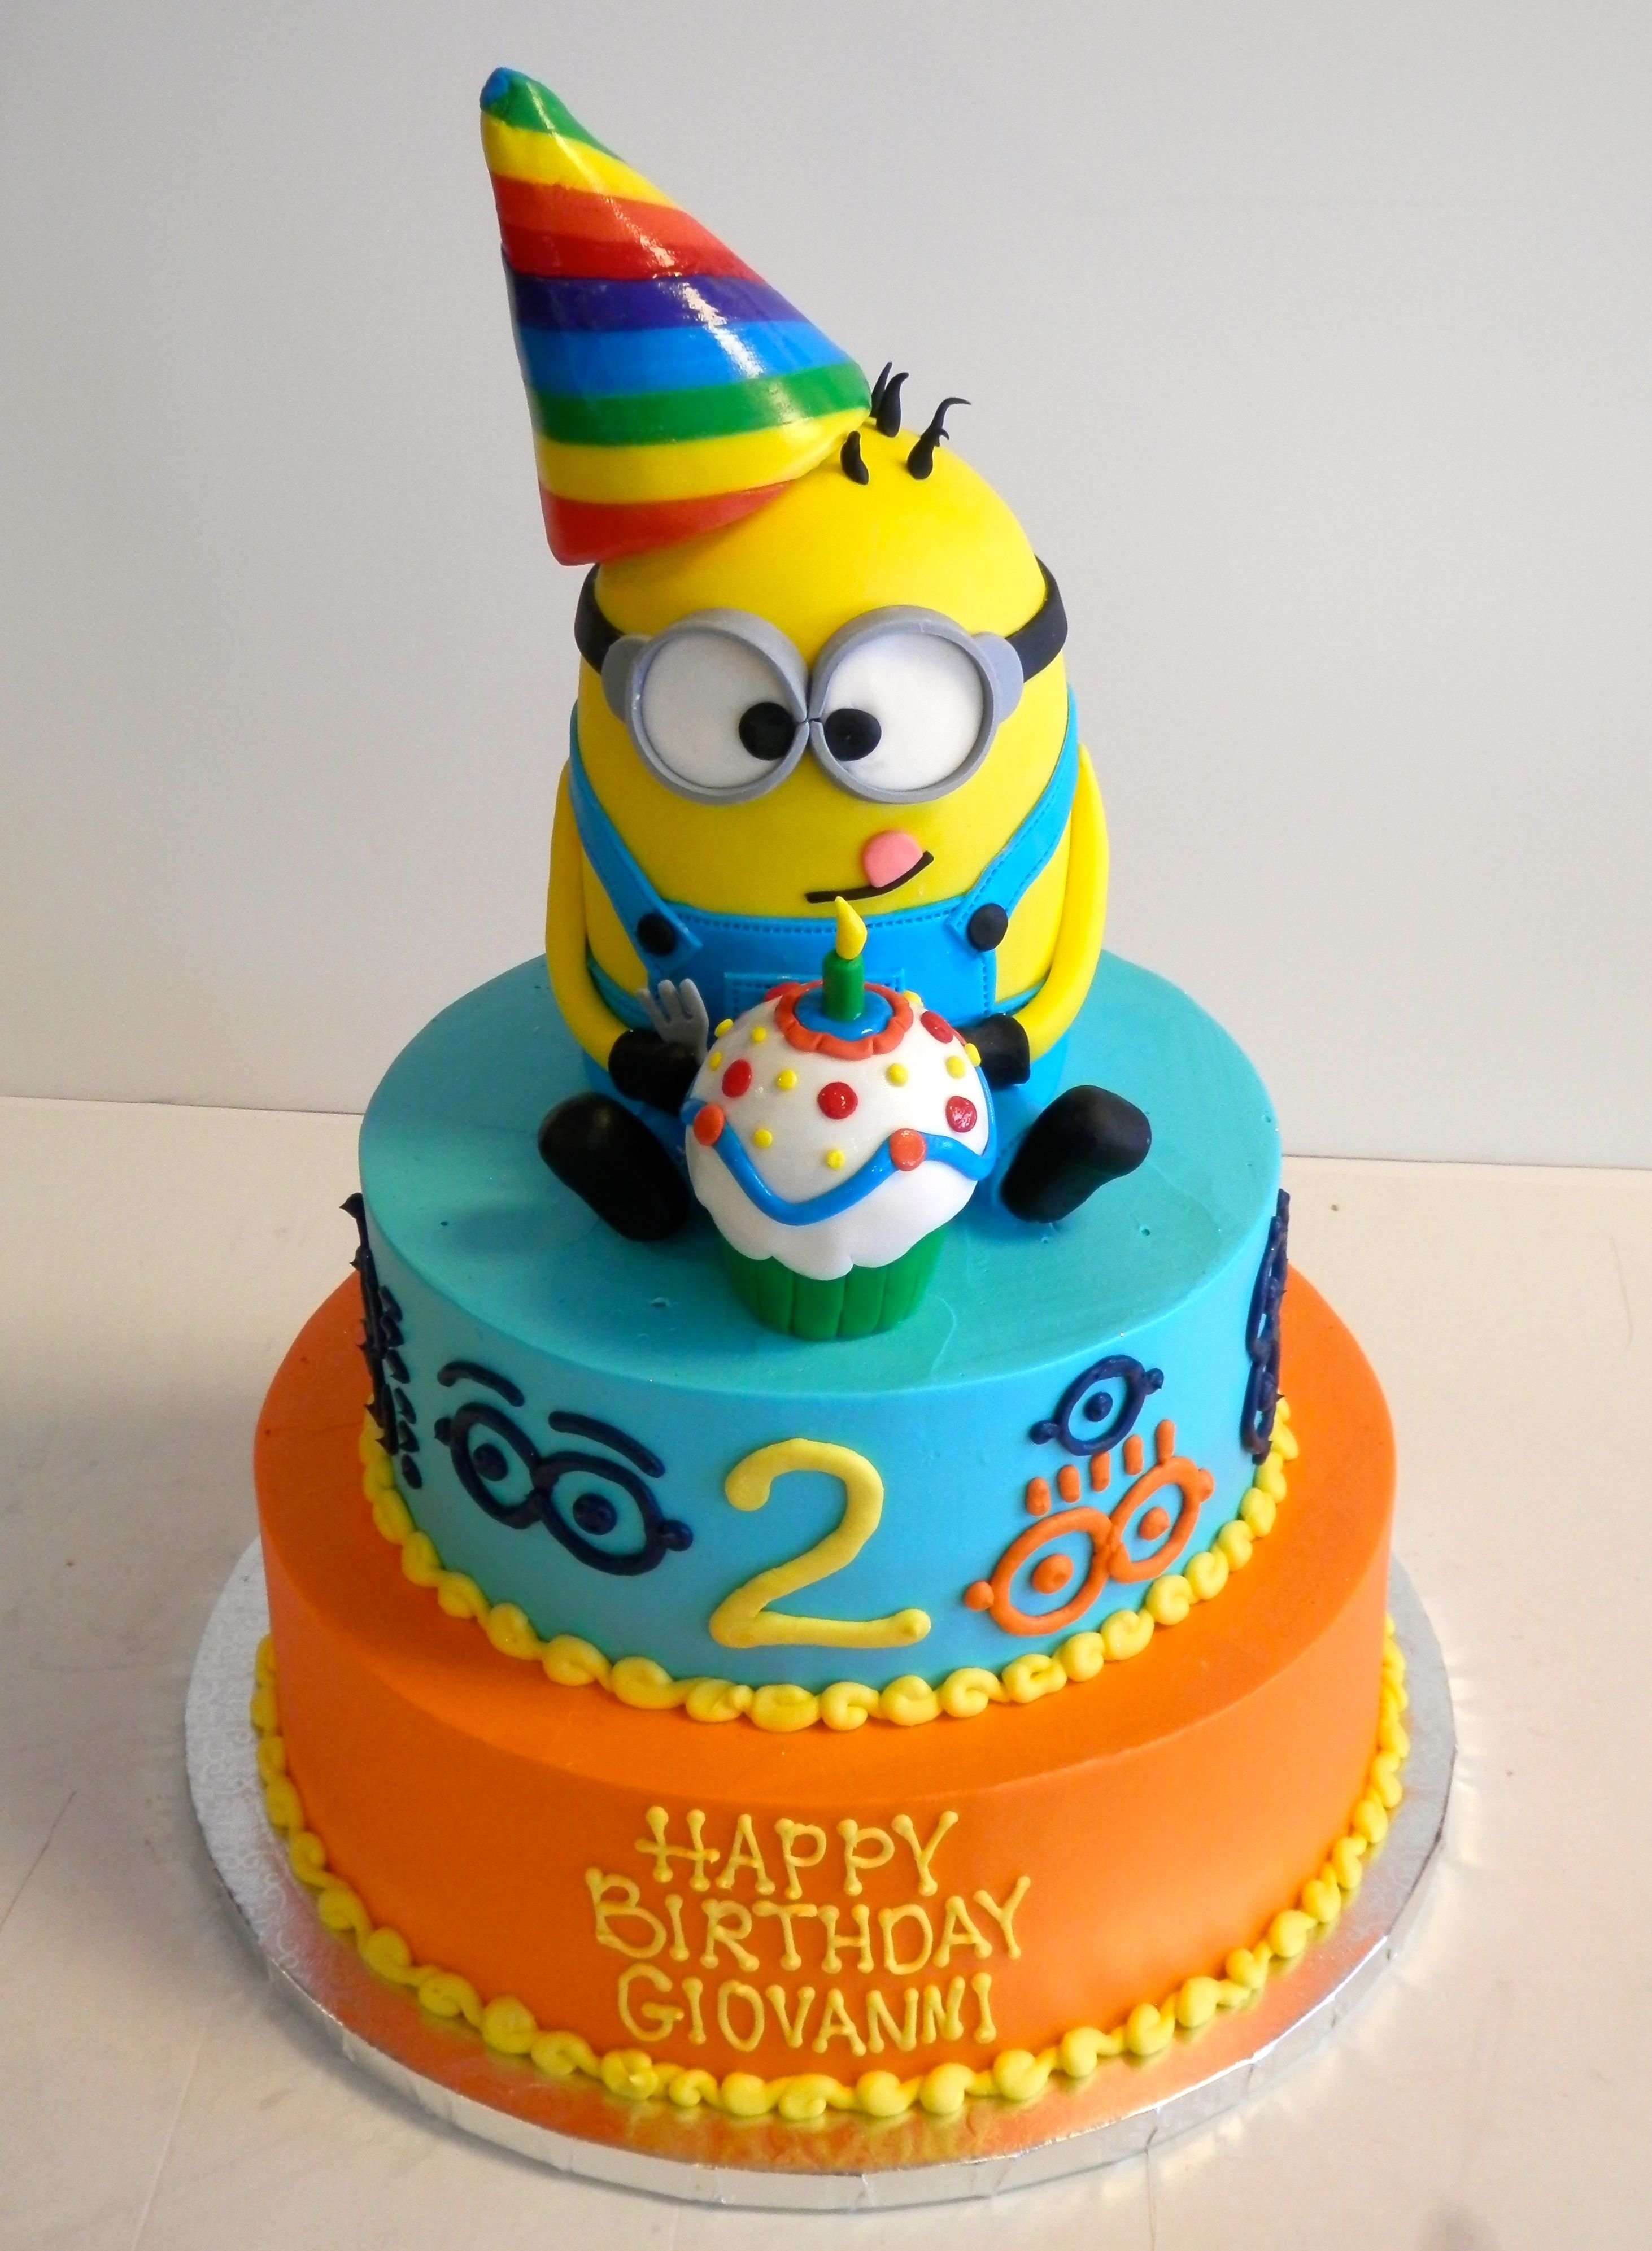 10 Lovable Despicable Me 2 Cake Ideas 2 year old birthday cake despicableme minions boys birthday 2022